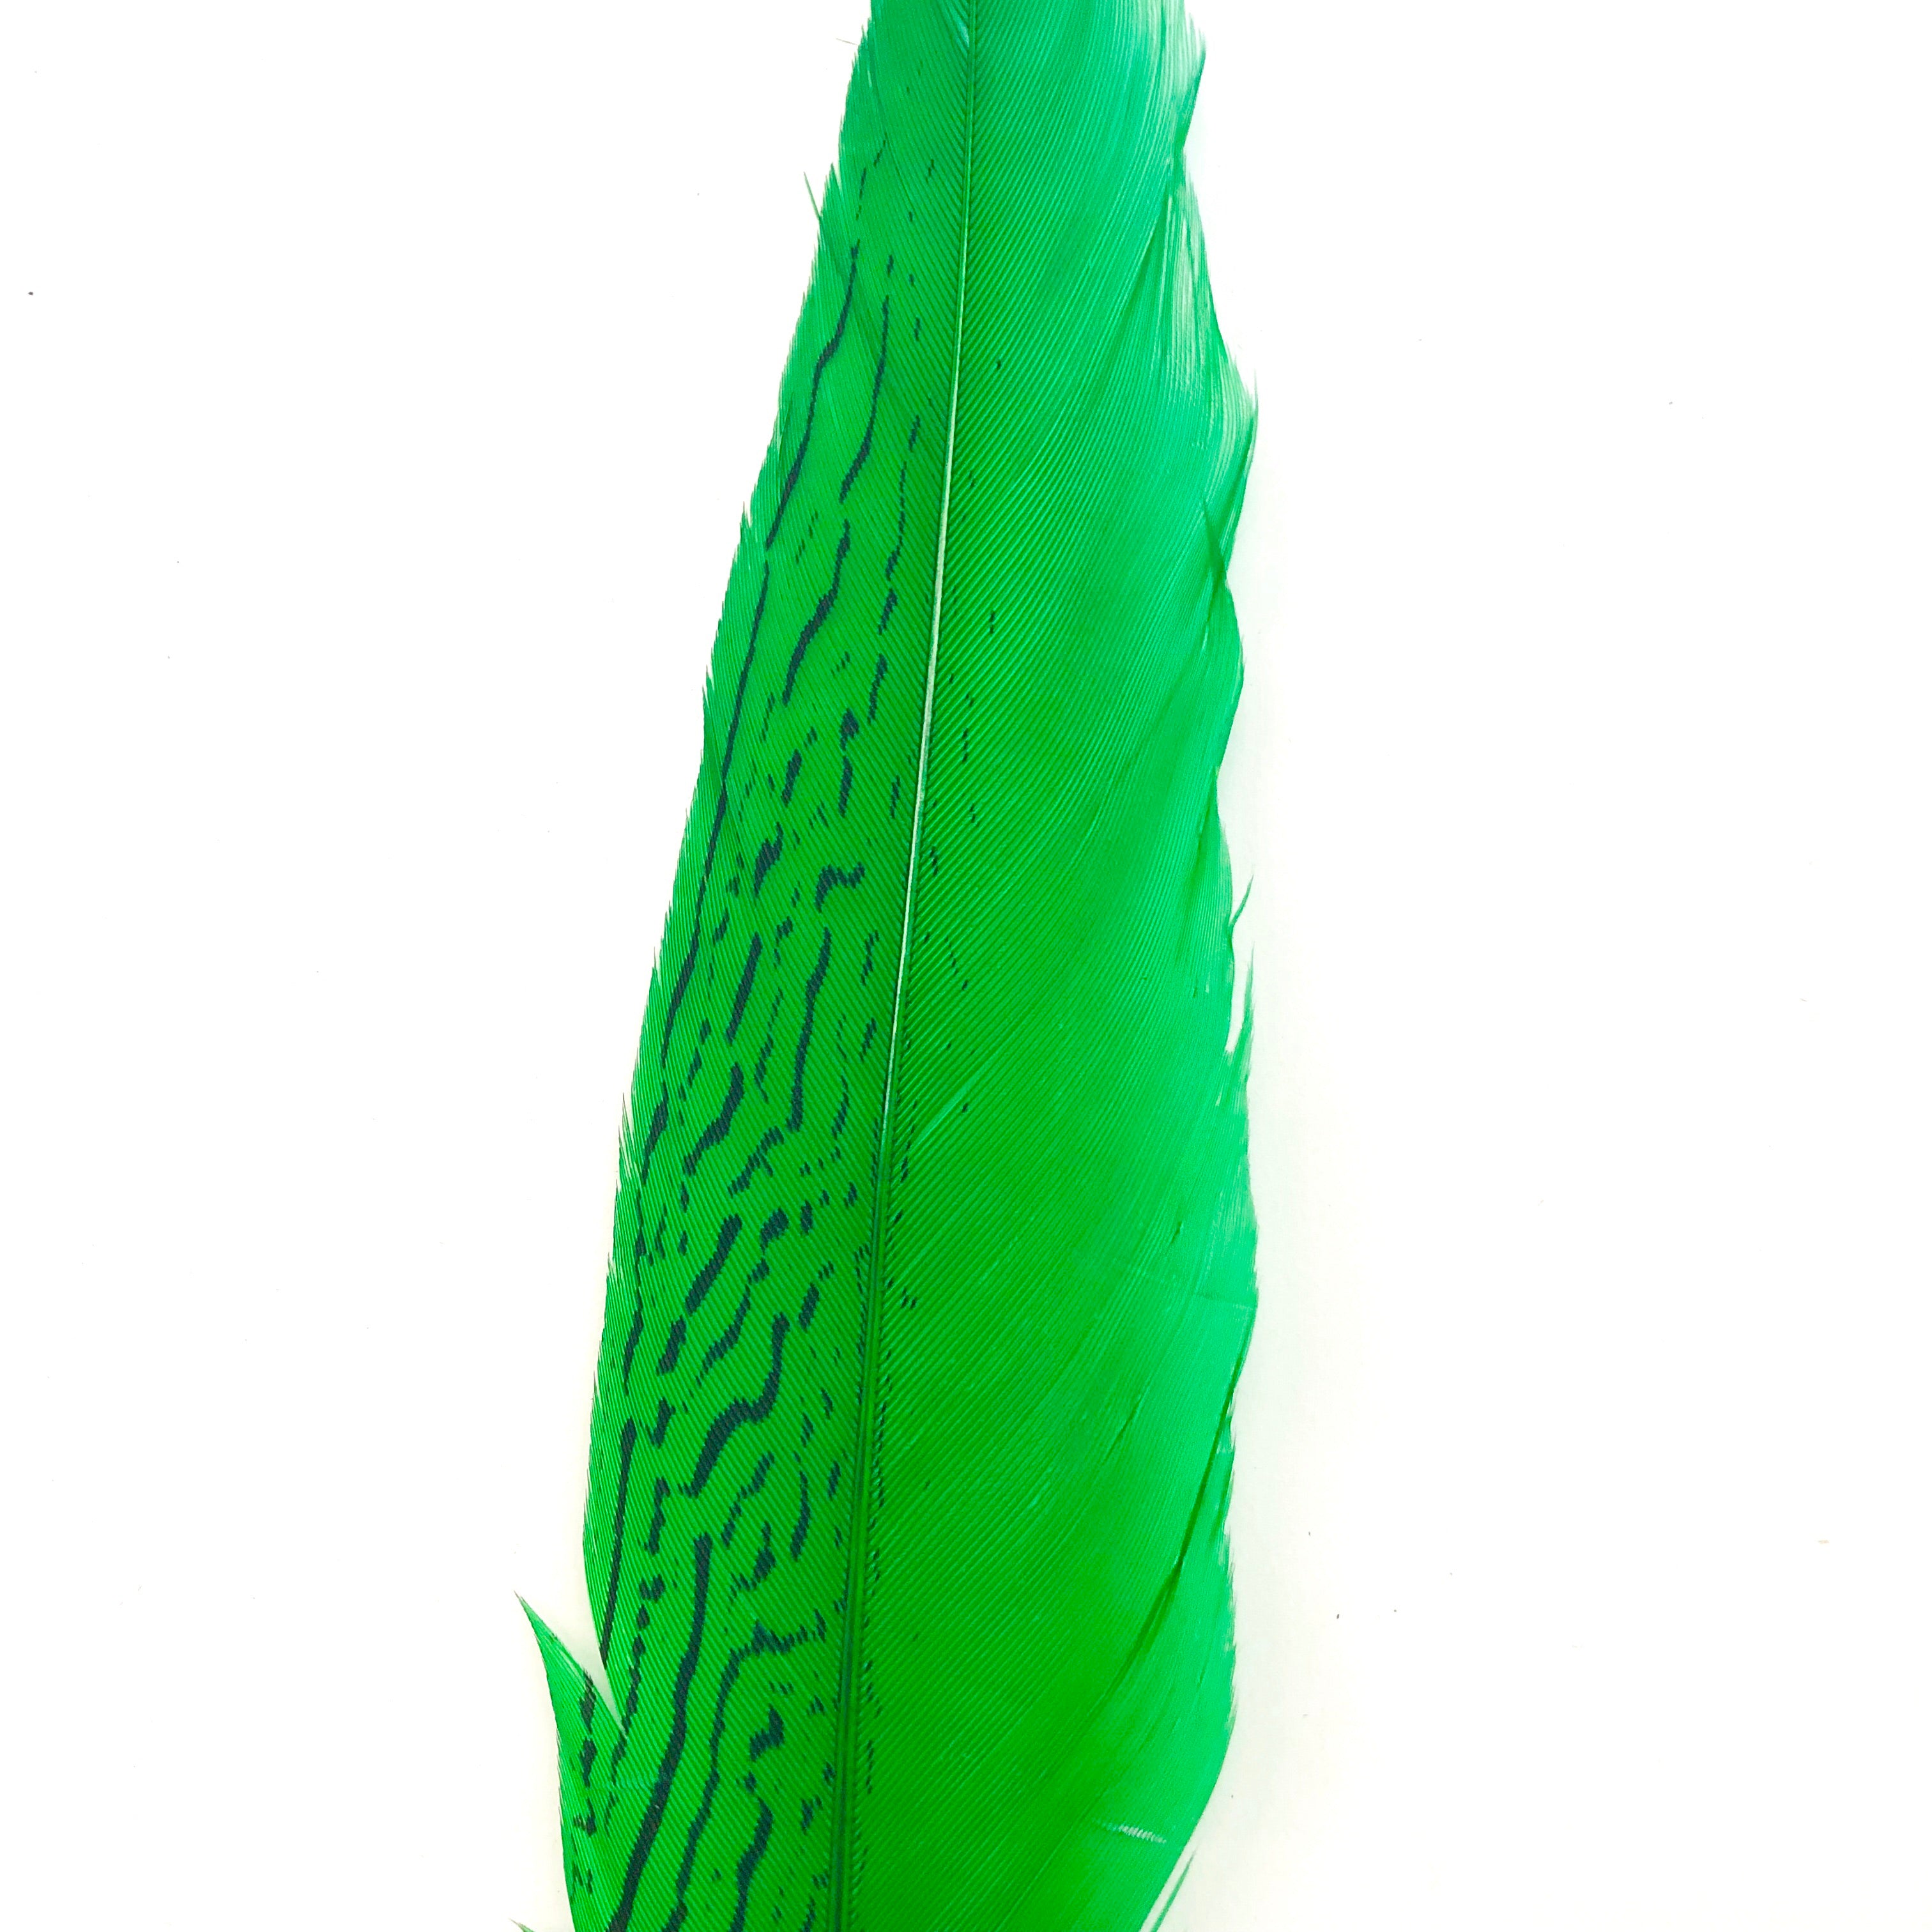 6" to 10" Silver Pheasant Tail Feather - Green